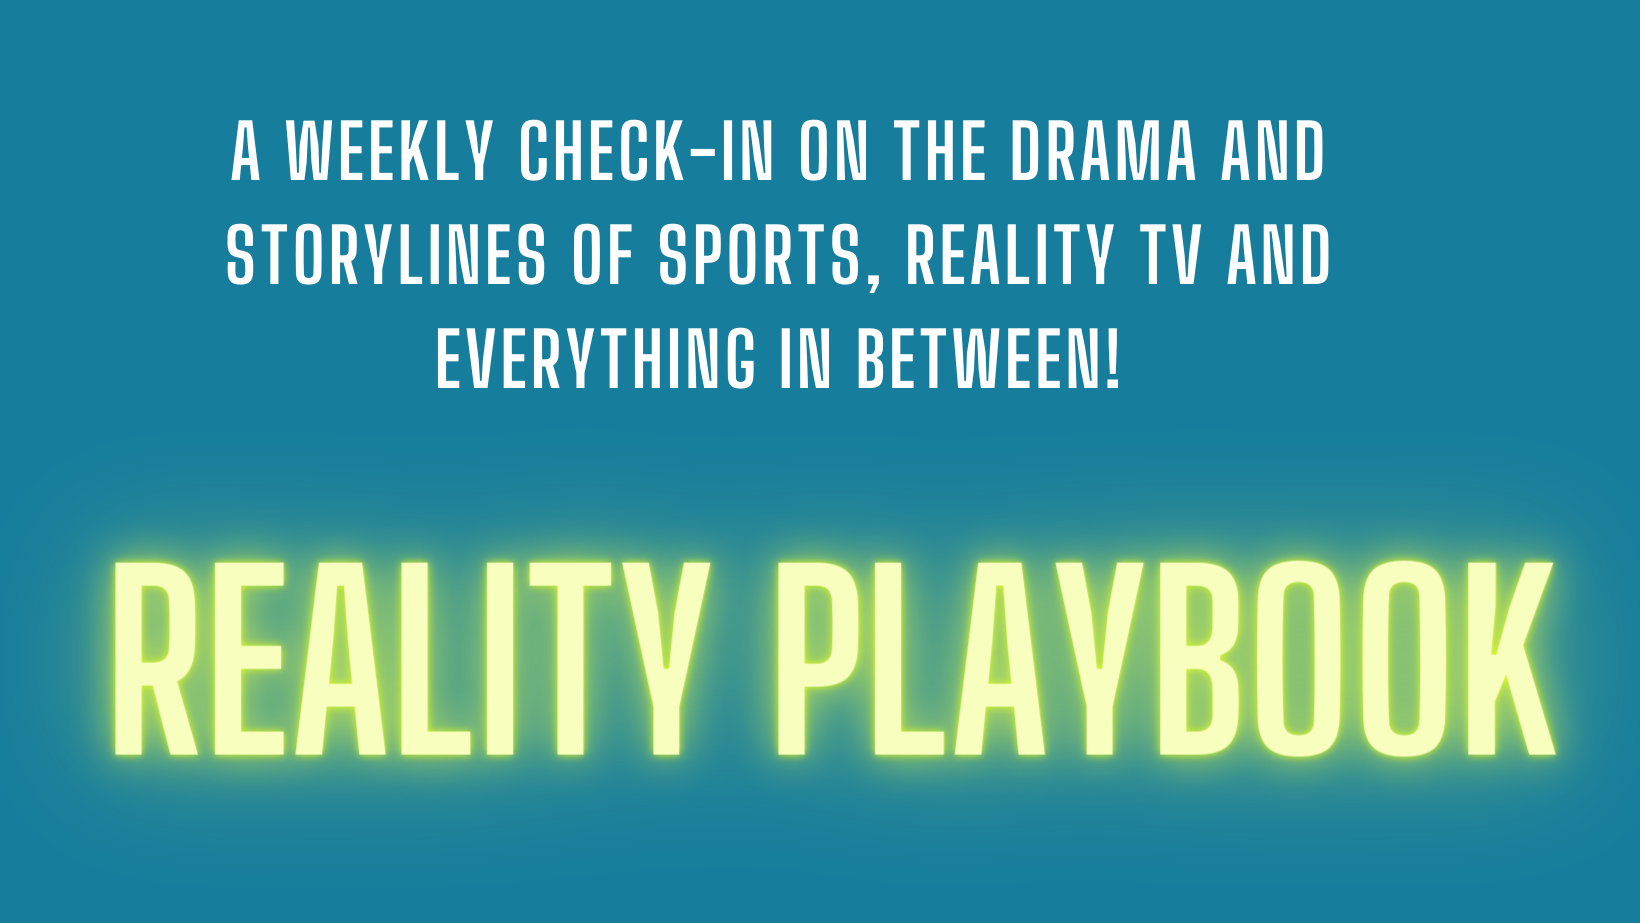 Weekly Check-In on Reality TV, Sports Storylines & Everything in Between!